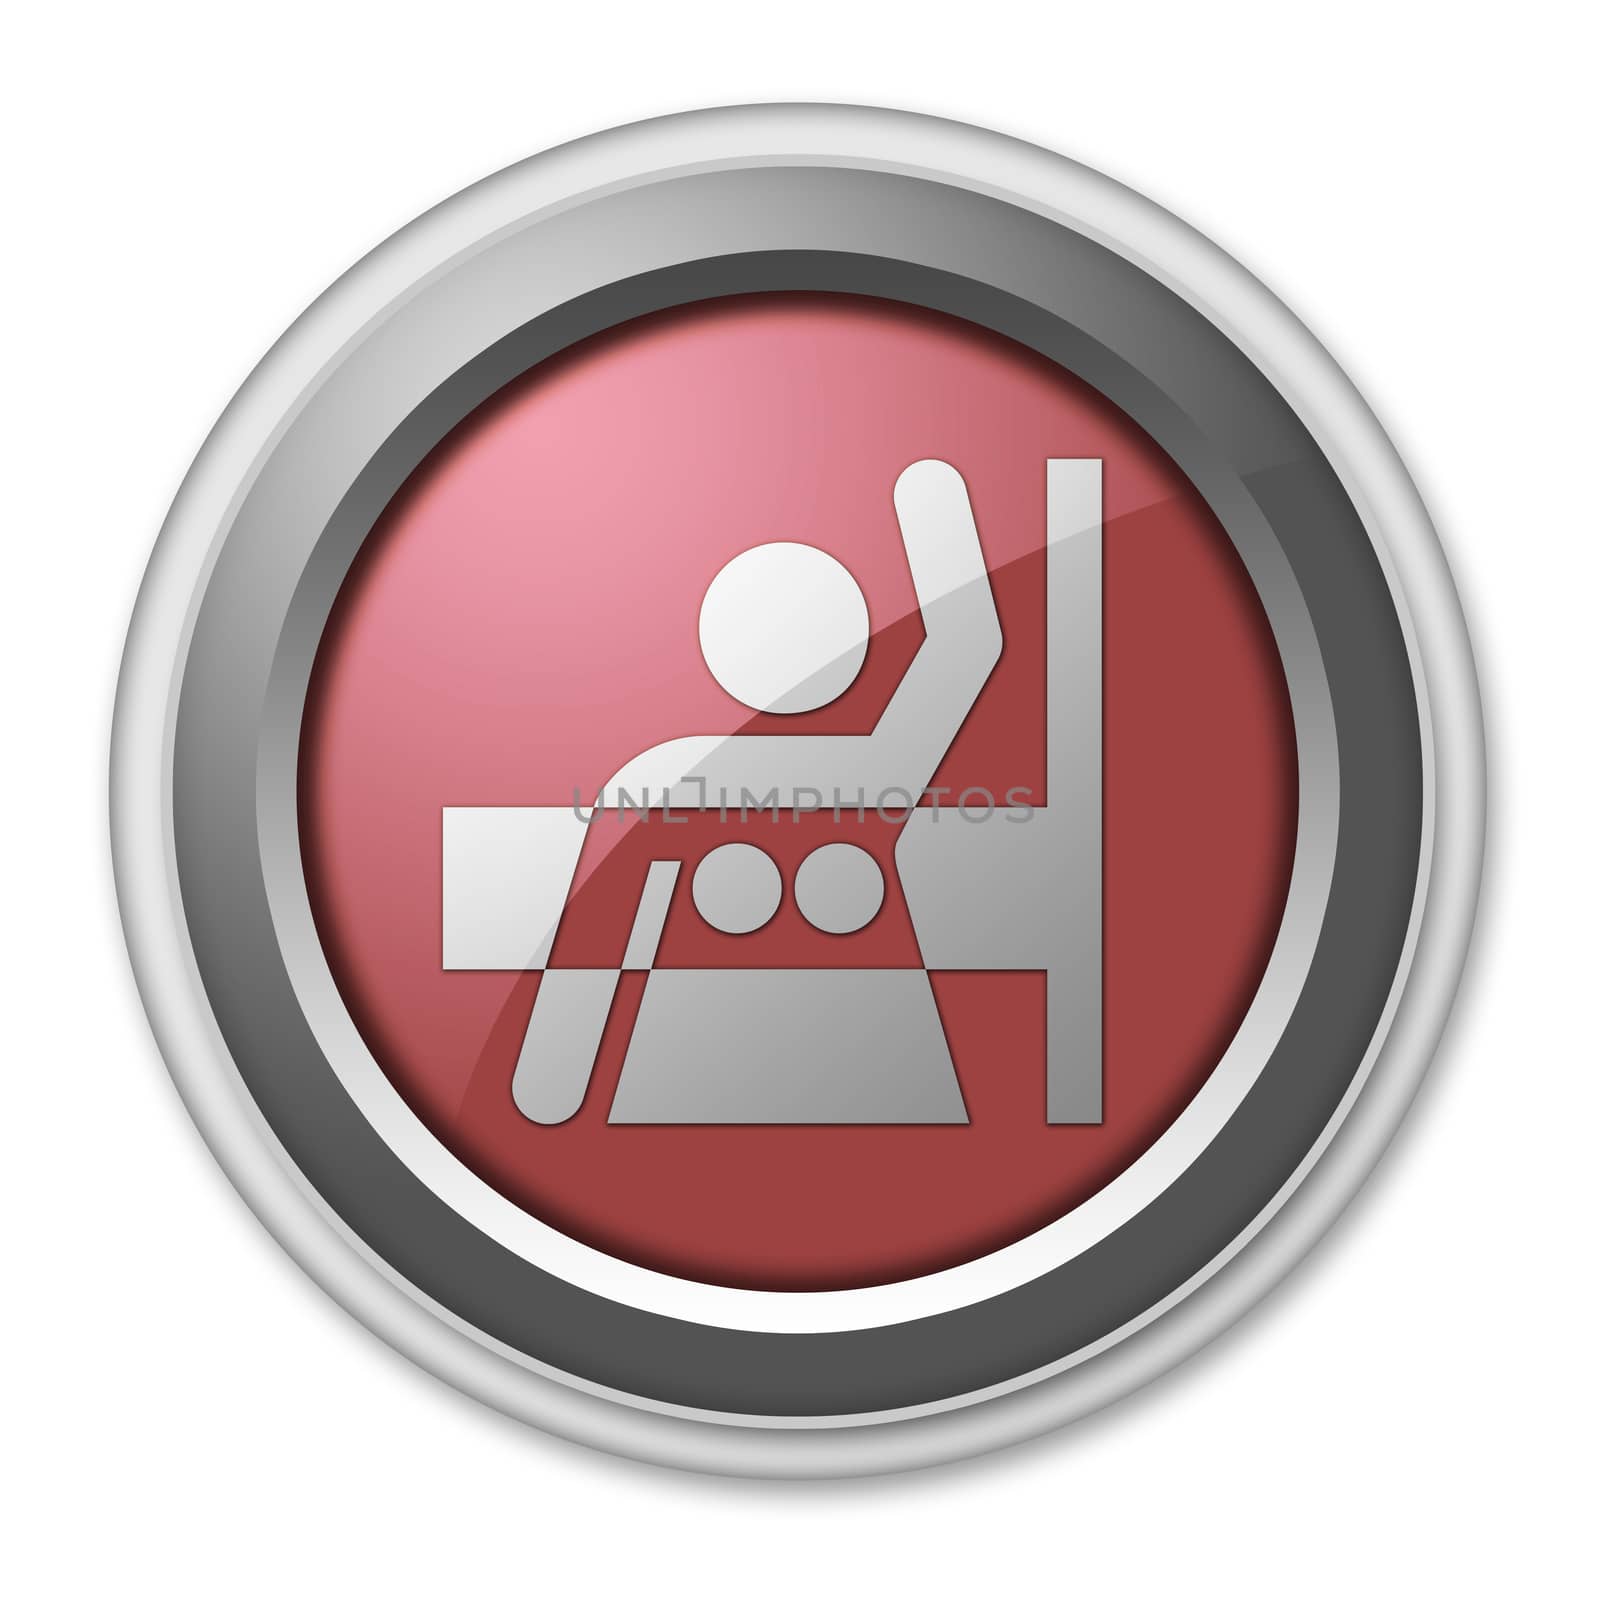 Icon, Button, Pictogram with Mammography symbol